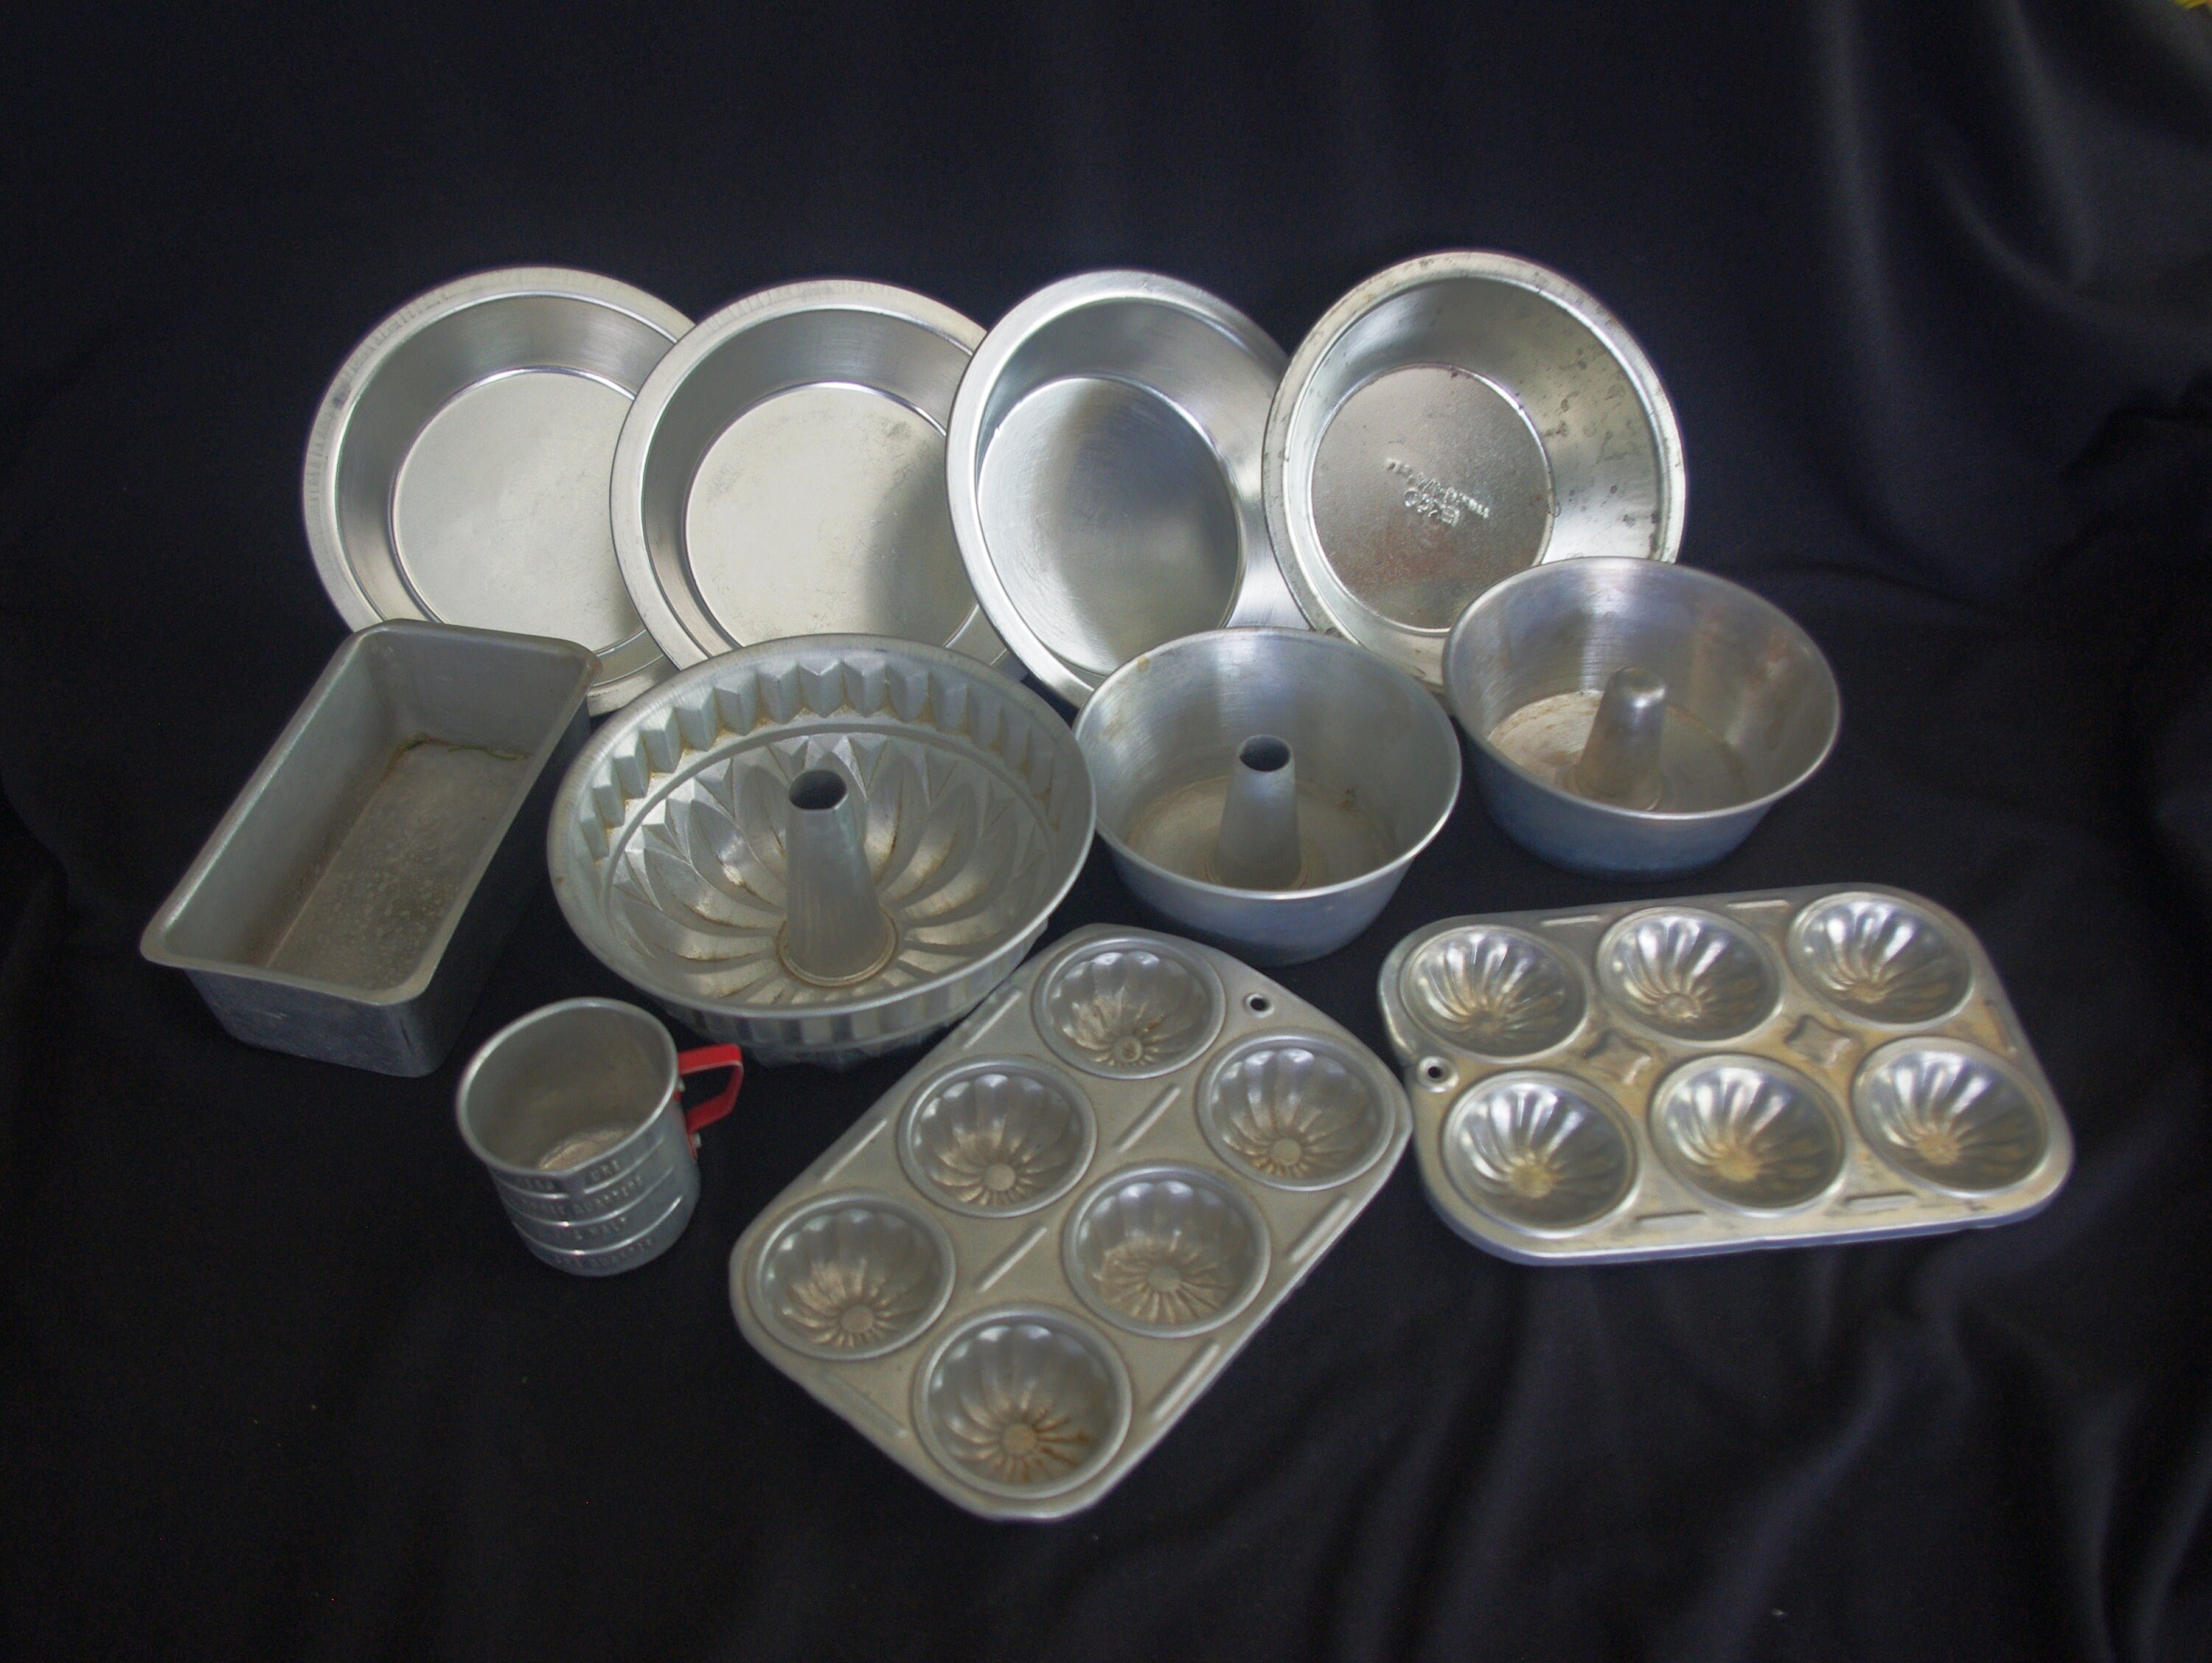 SALE! Vintage 1960s Easy Bake Oven Accessories - Muffin Tin, Baking Pan,  Spatula